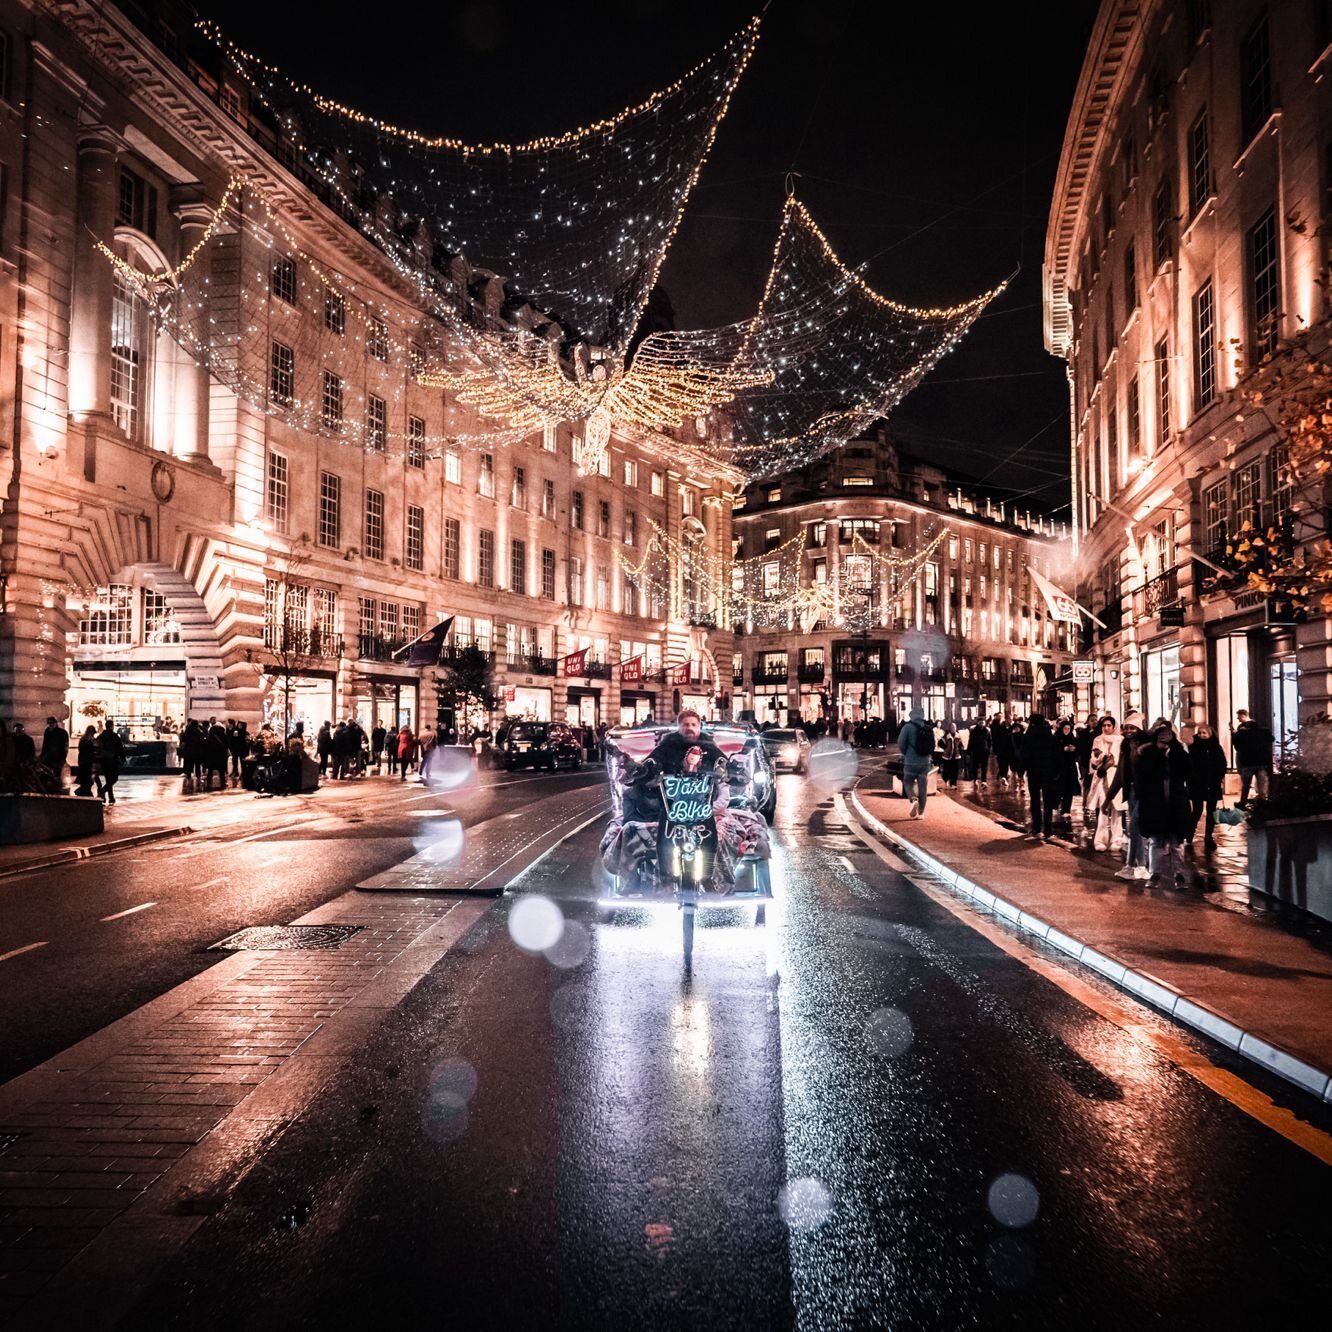 Riding through #picadilly during the holidays 

📷 #SonyA7iii